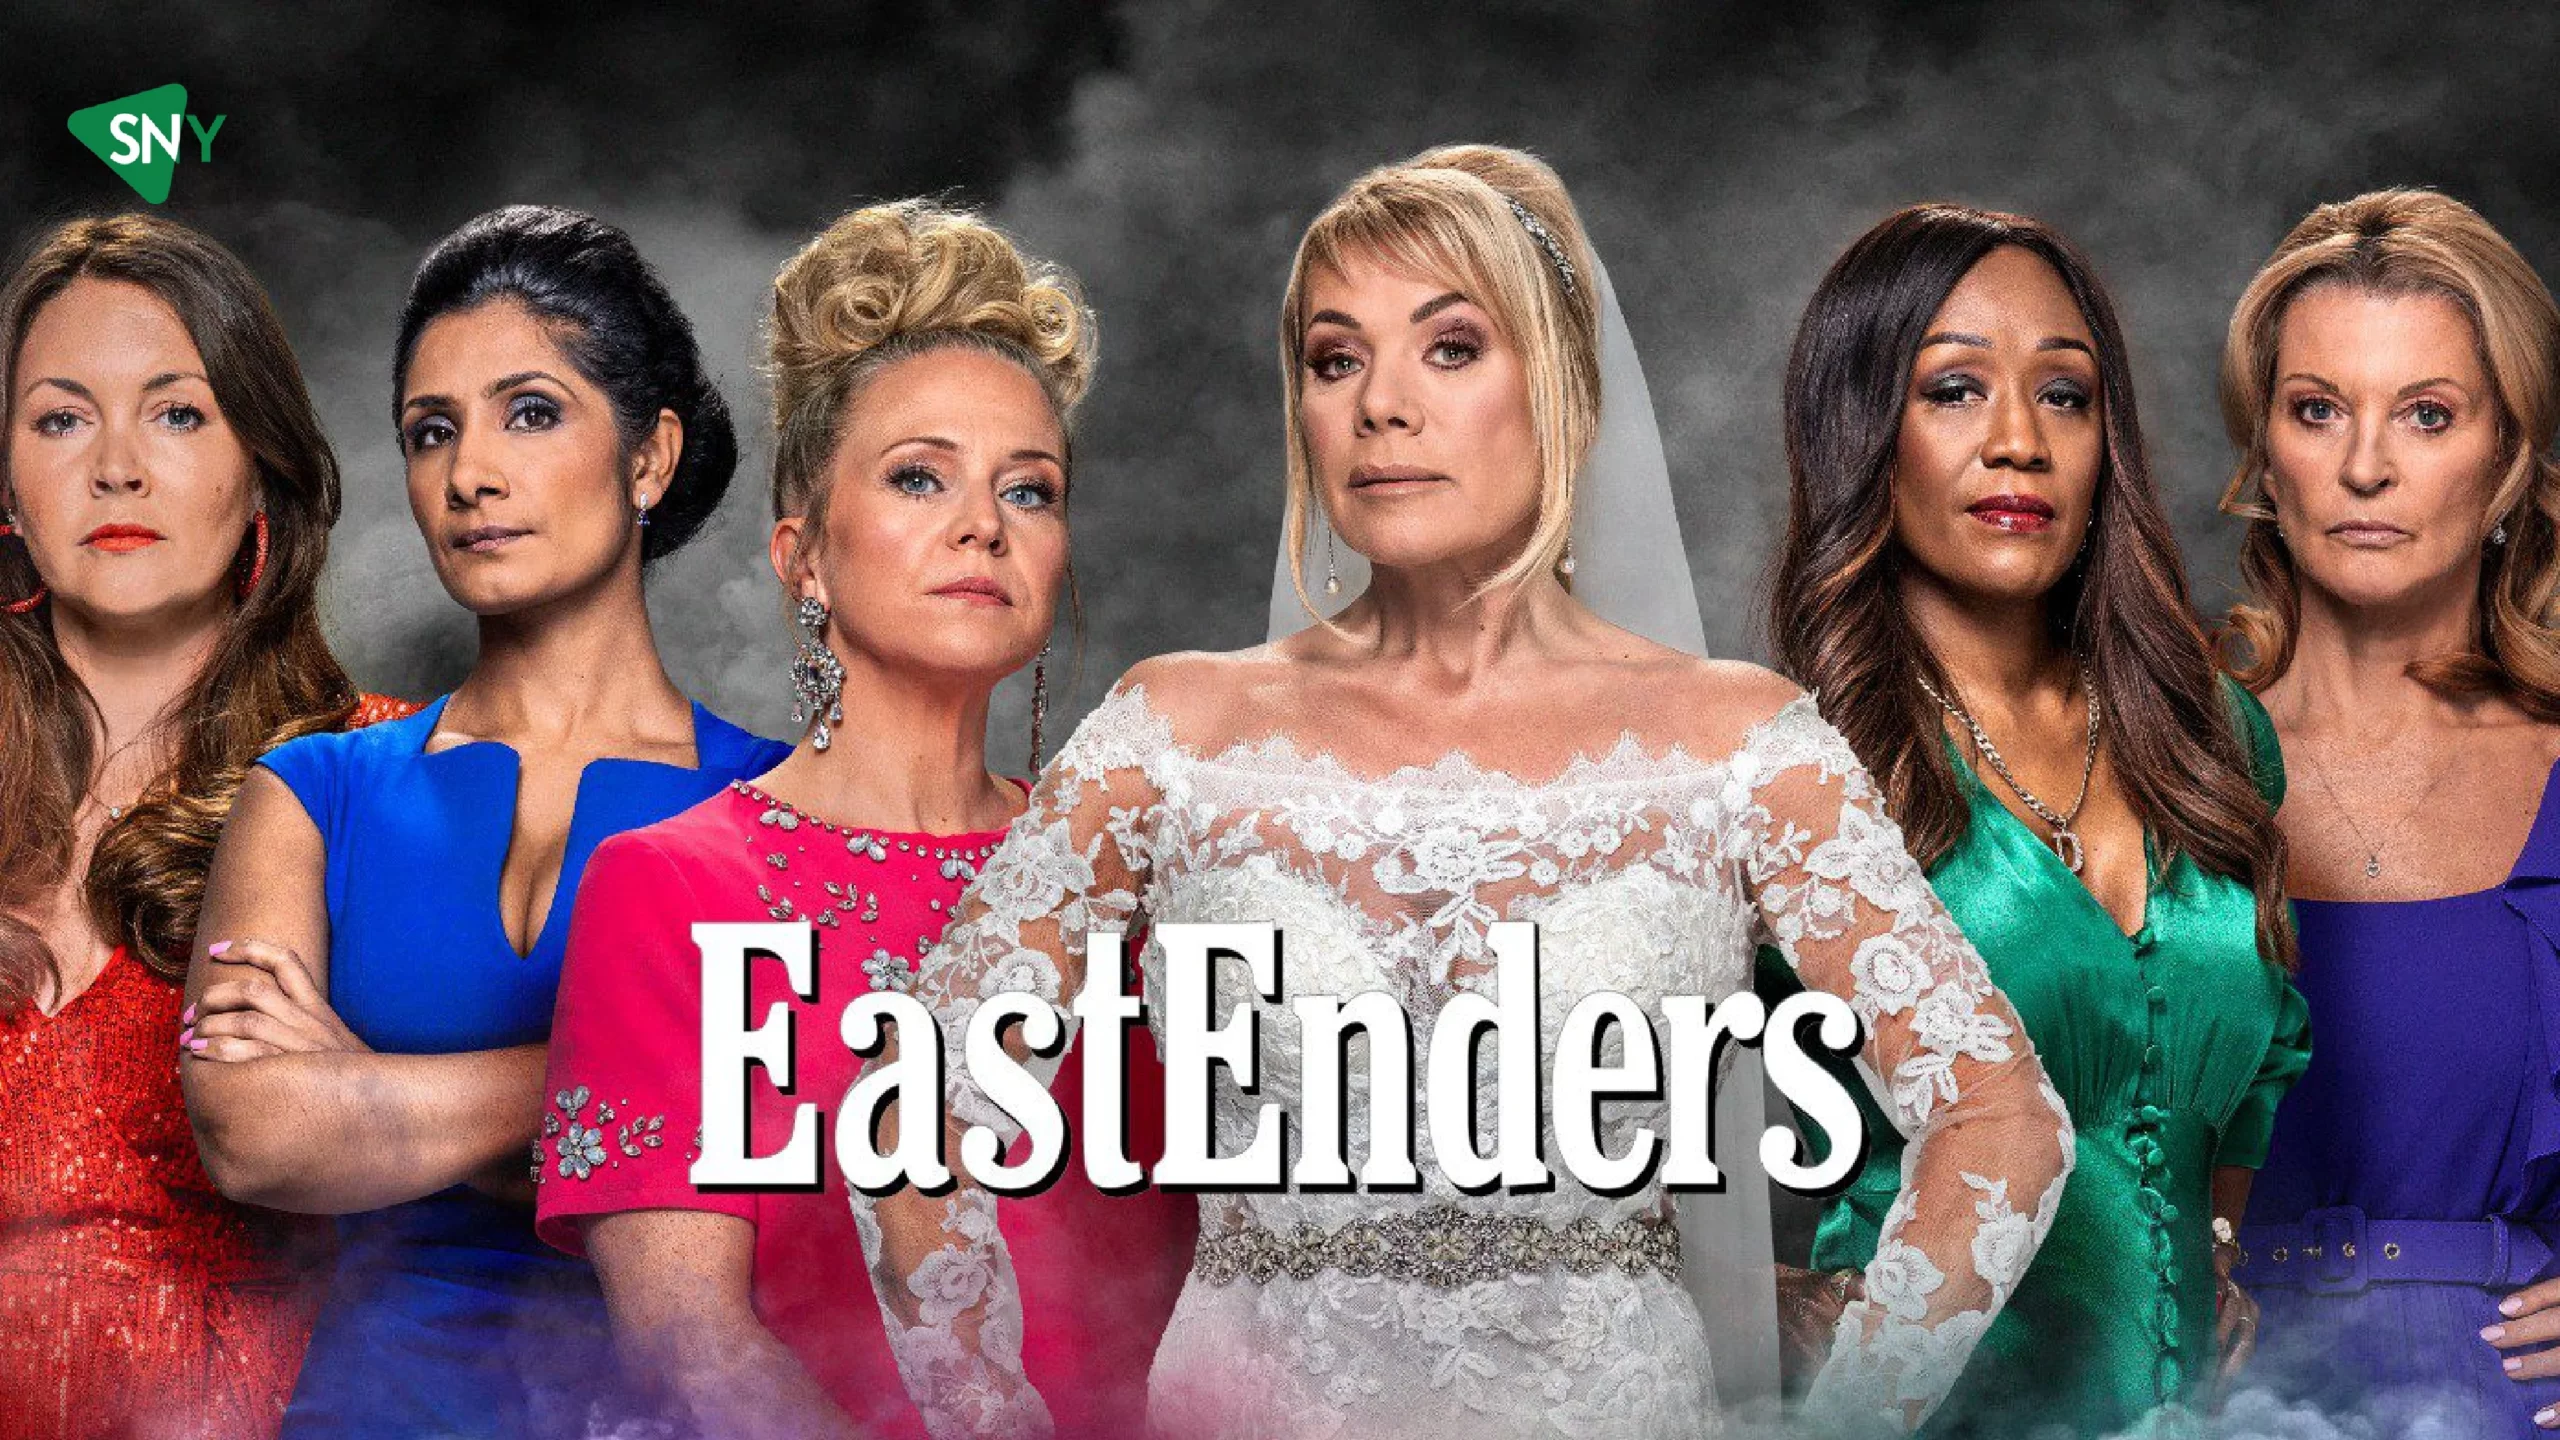 To watch EastEnders: The Six in New Zealand